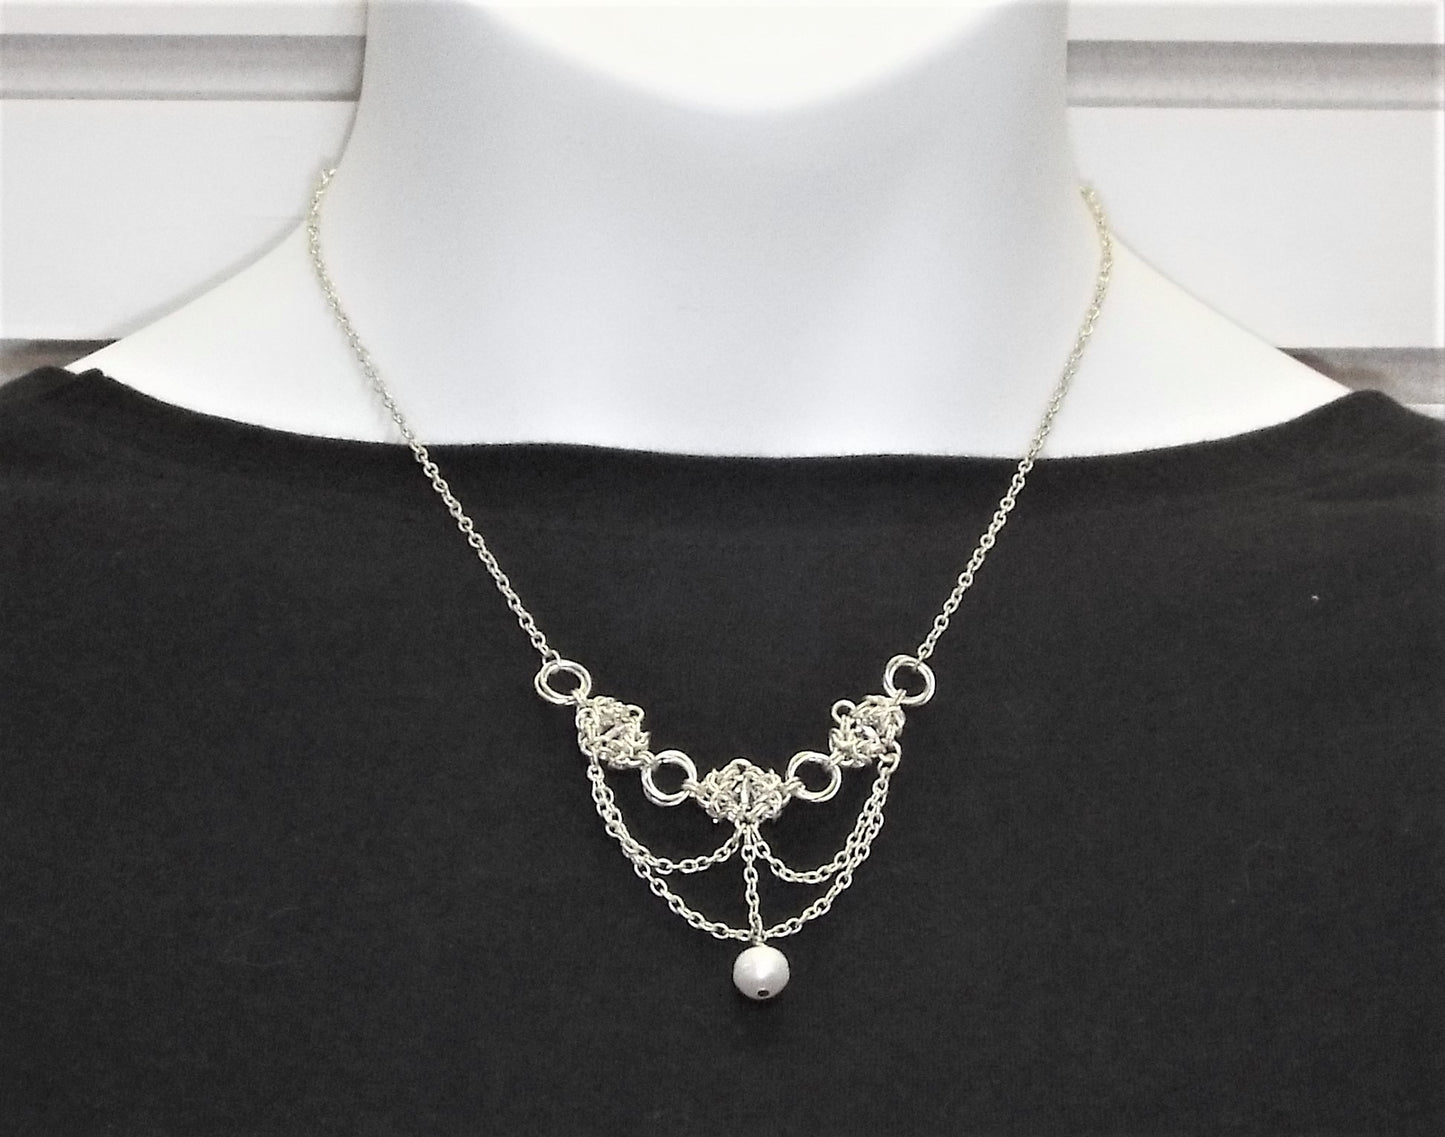 Necklace, Bridal - NEW LOWER PRICE!